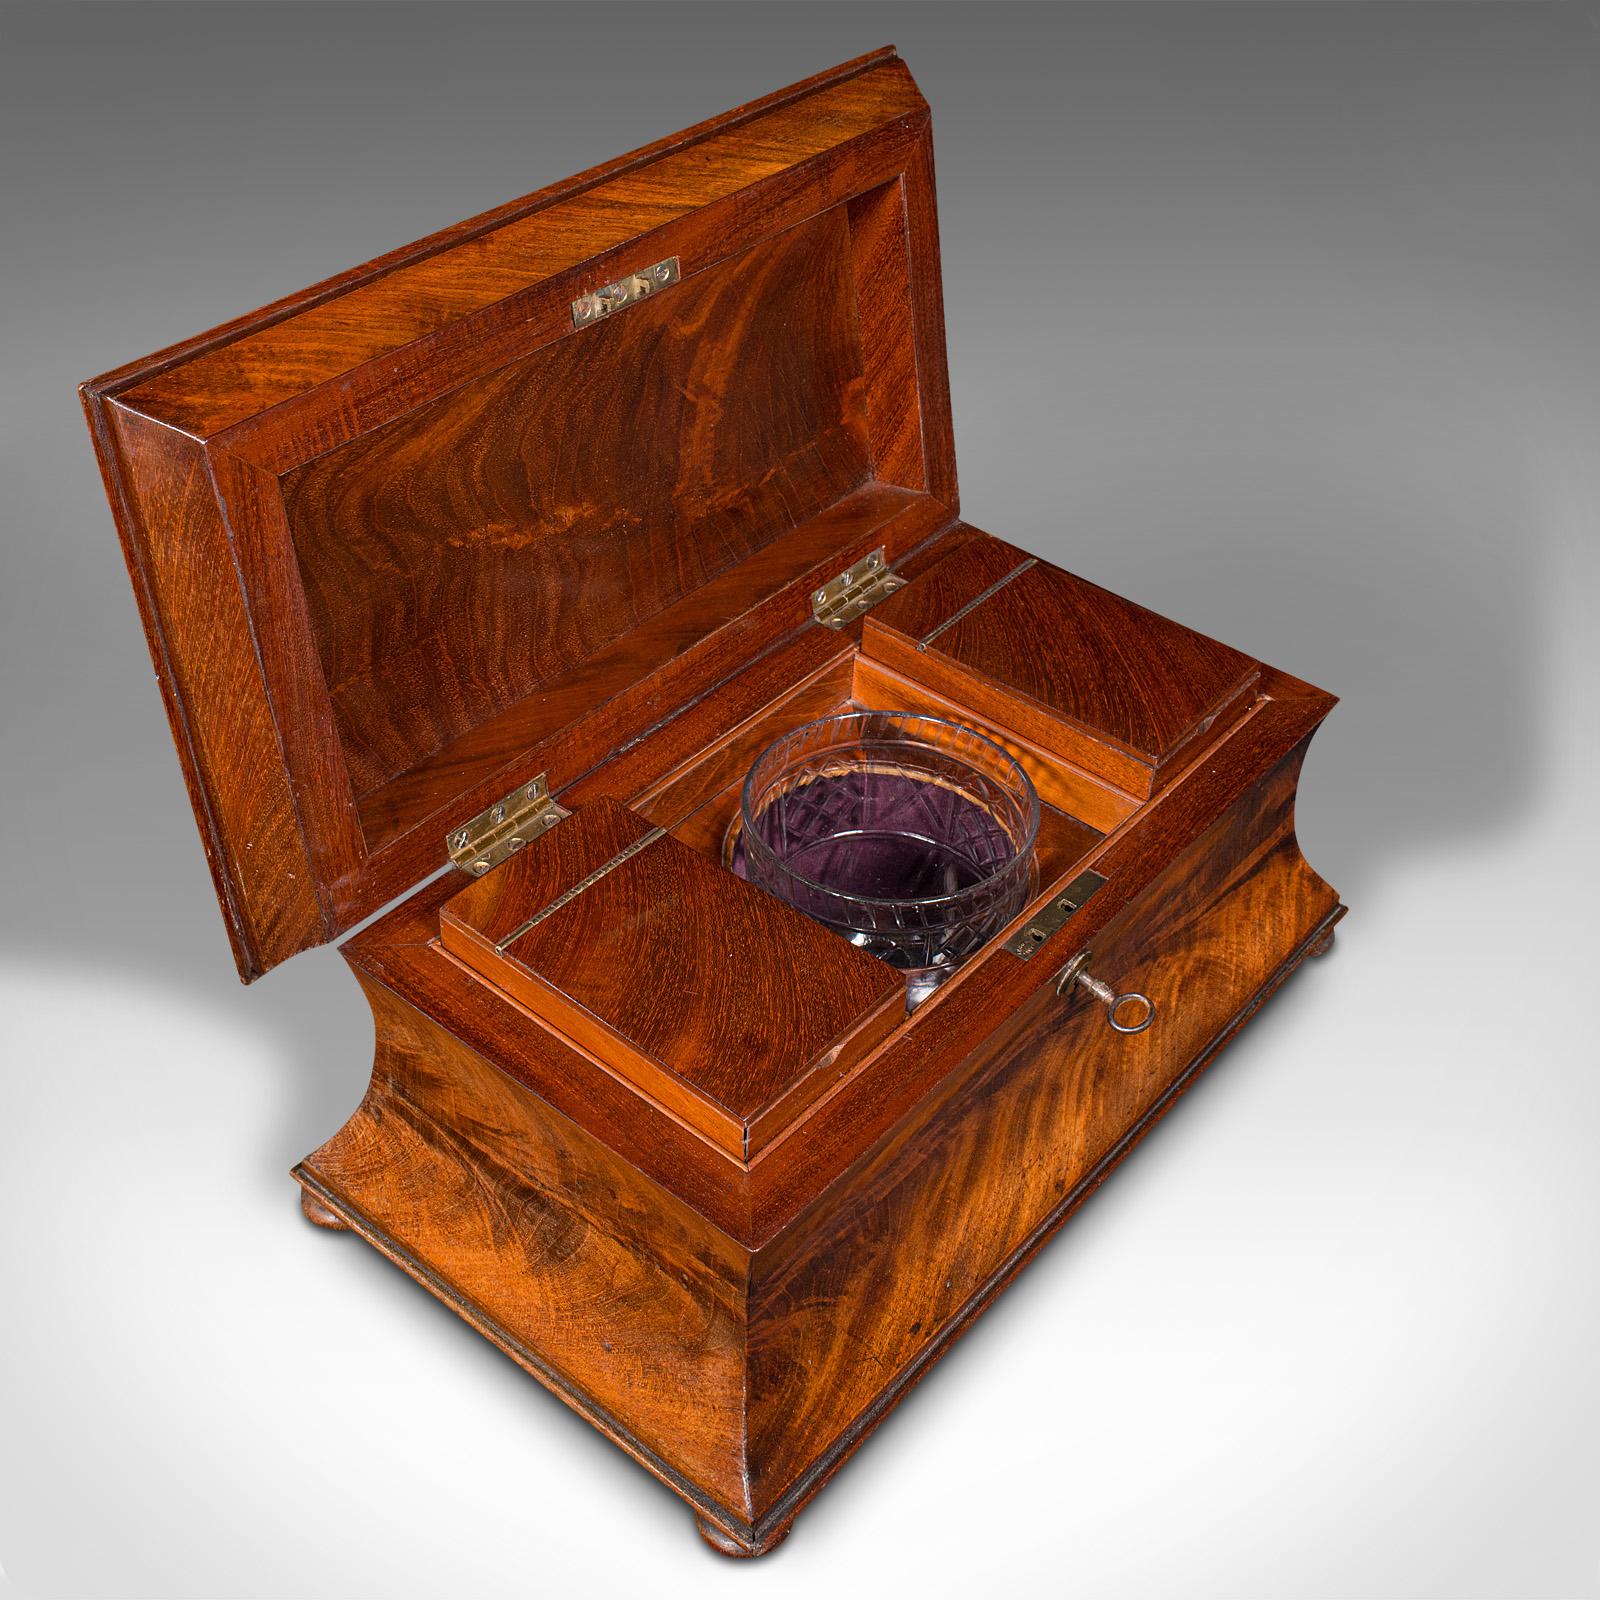 Wood Antique Drawing Room Tea Caddy, English, Flame, Sarcophagus, Regency, circa 1820 For Sale